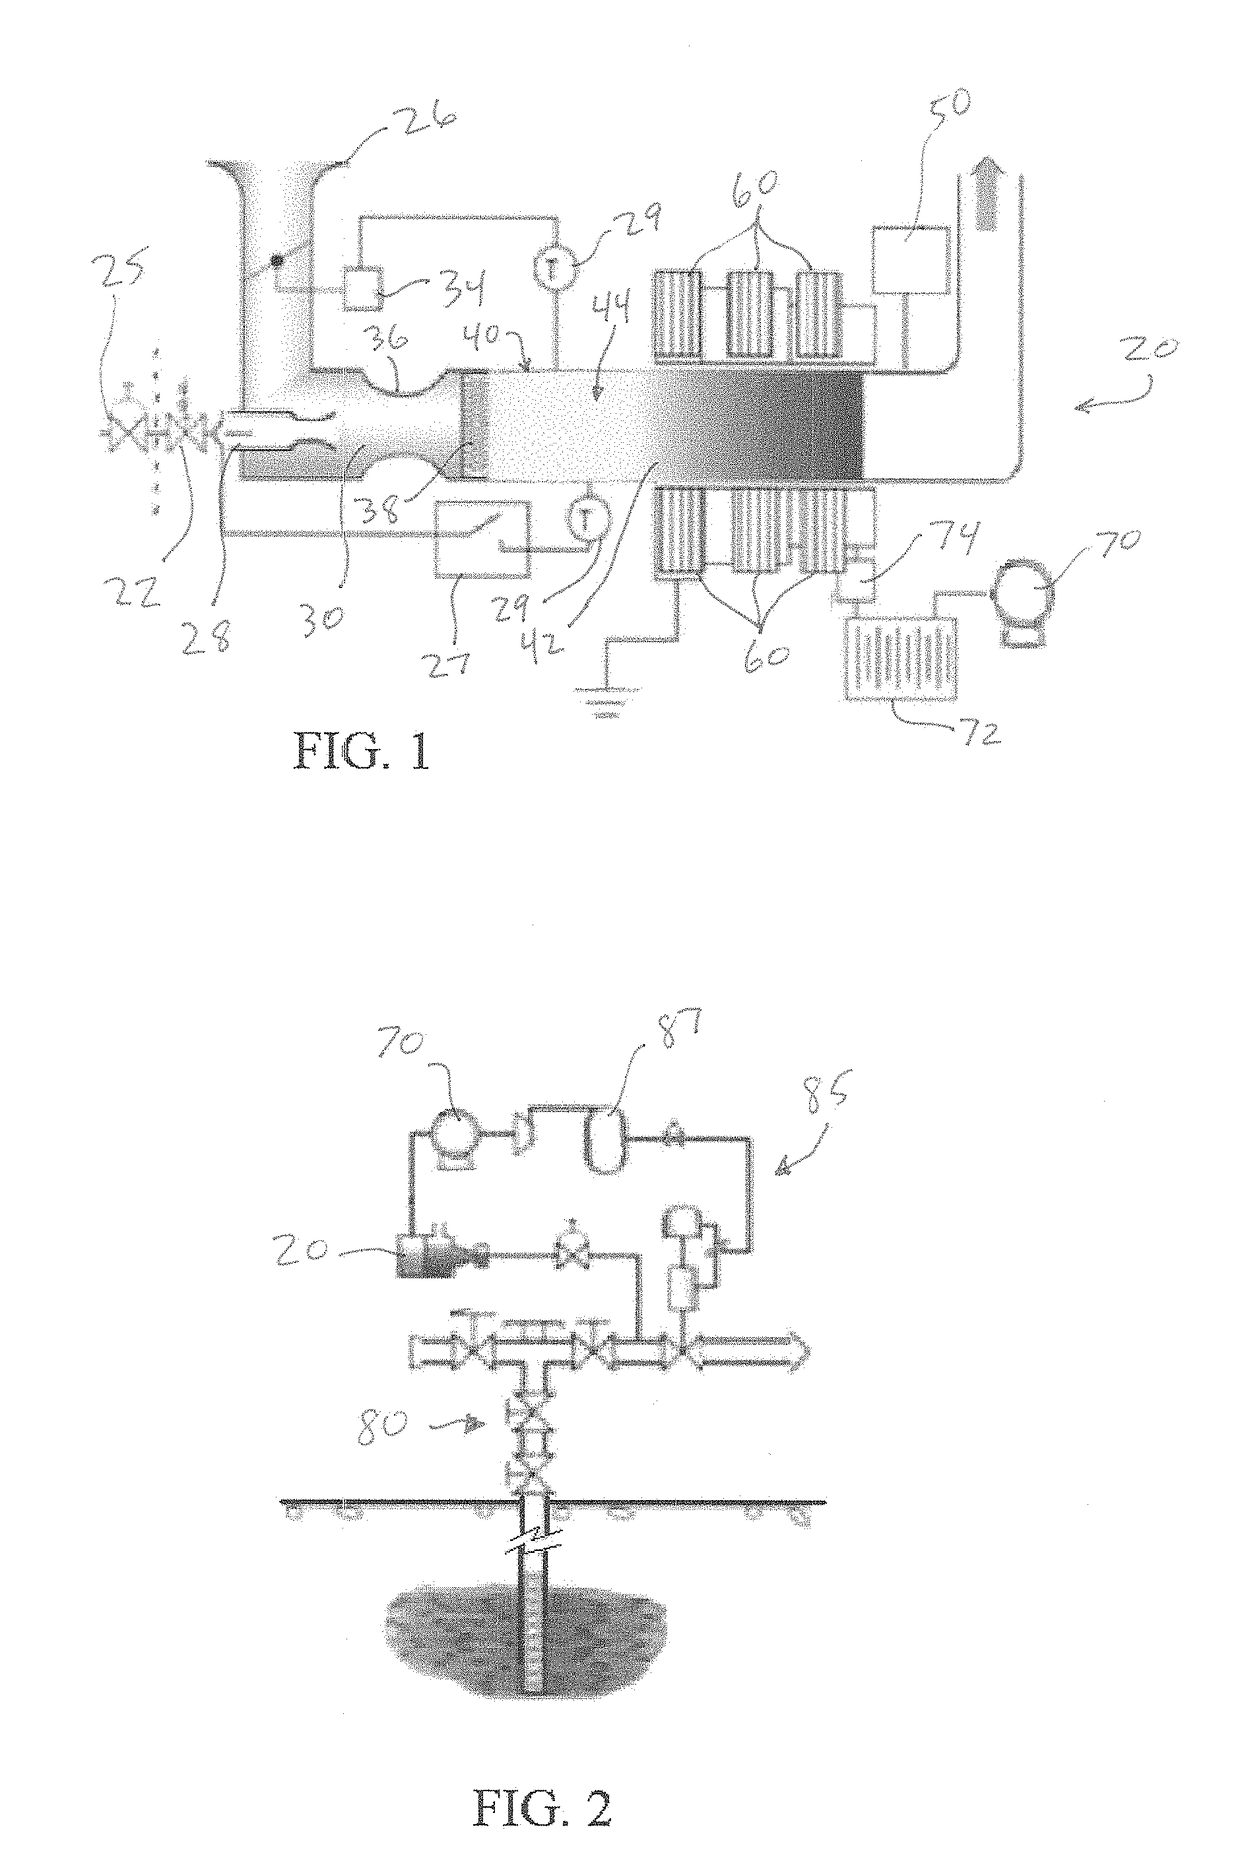 Dry, low-nox combustor with integrated thermoelectric generator